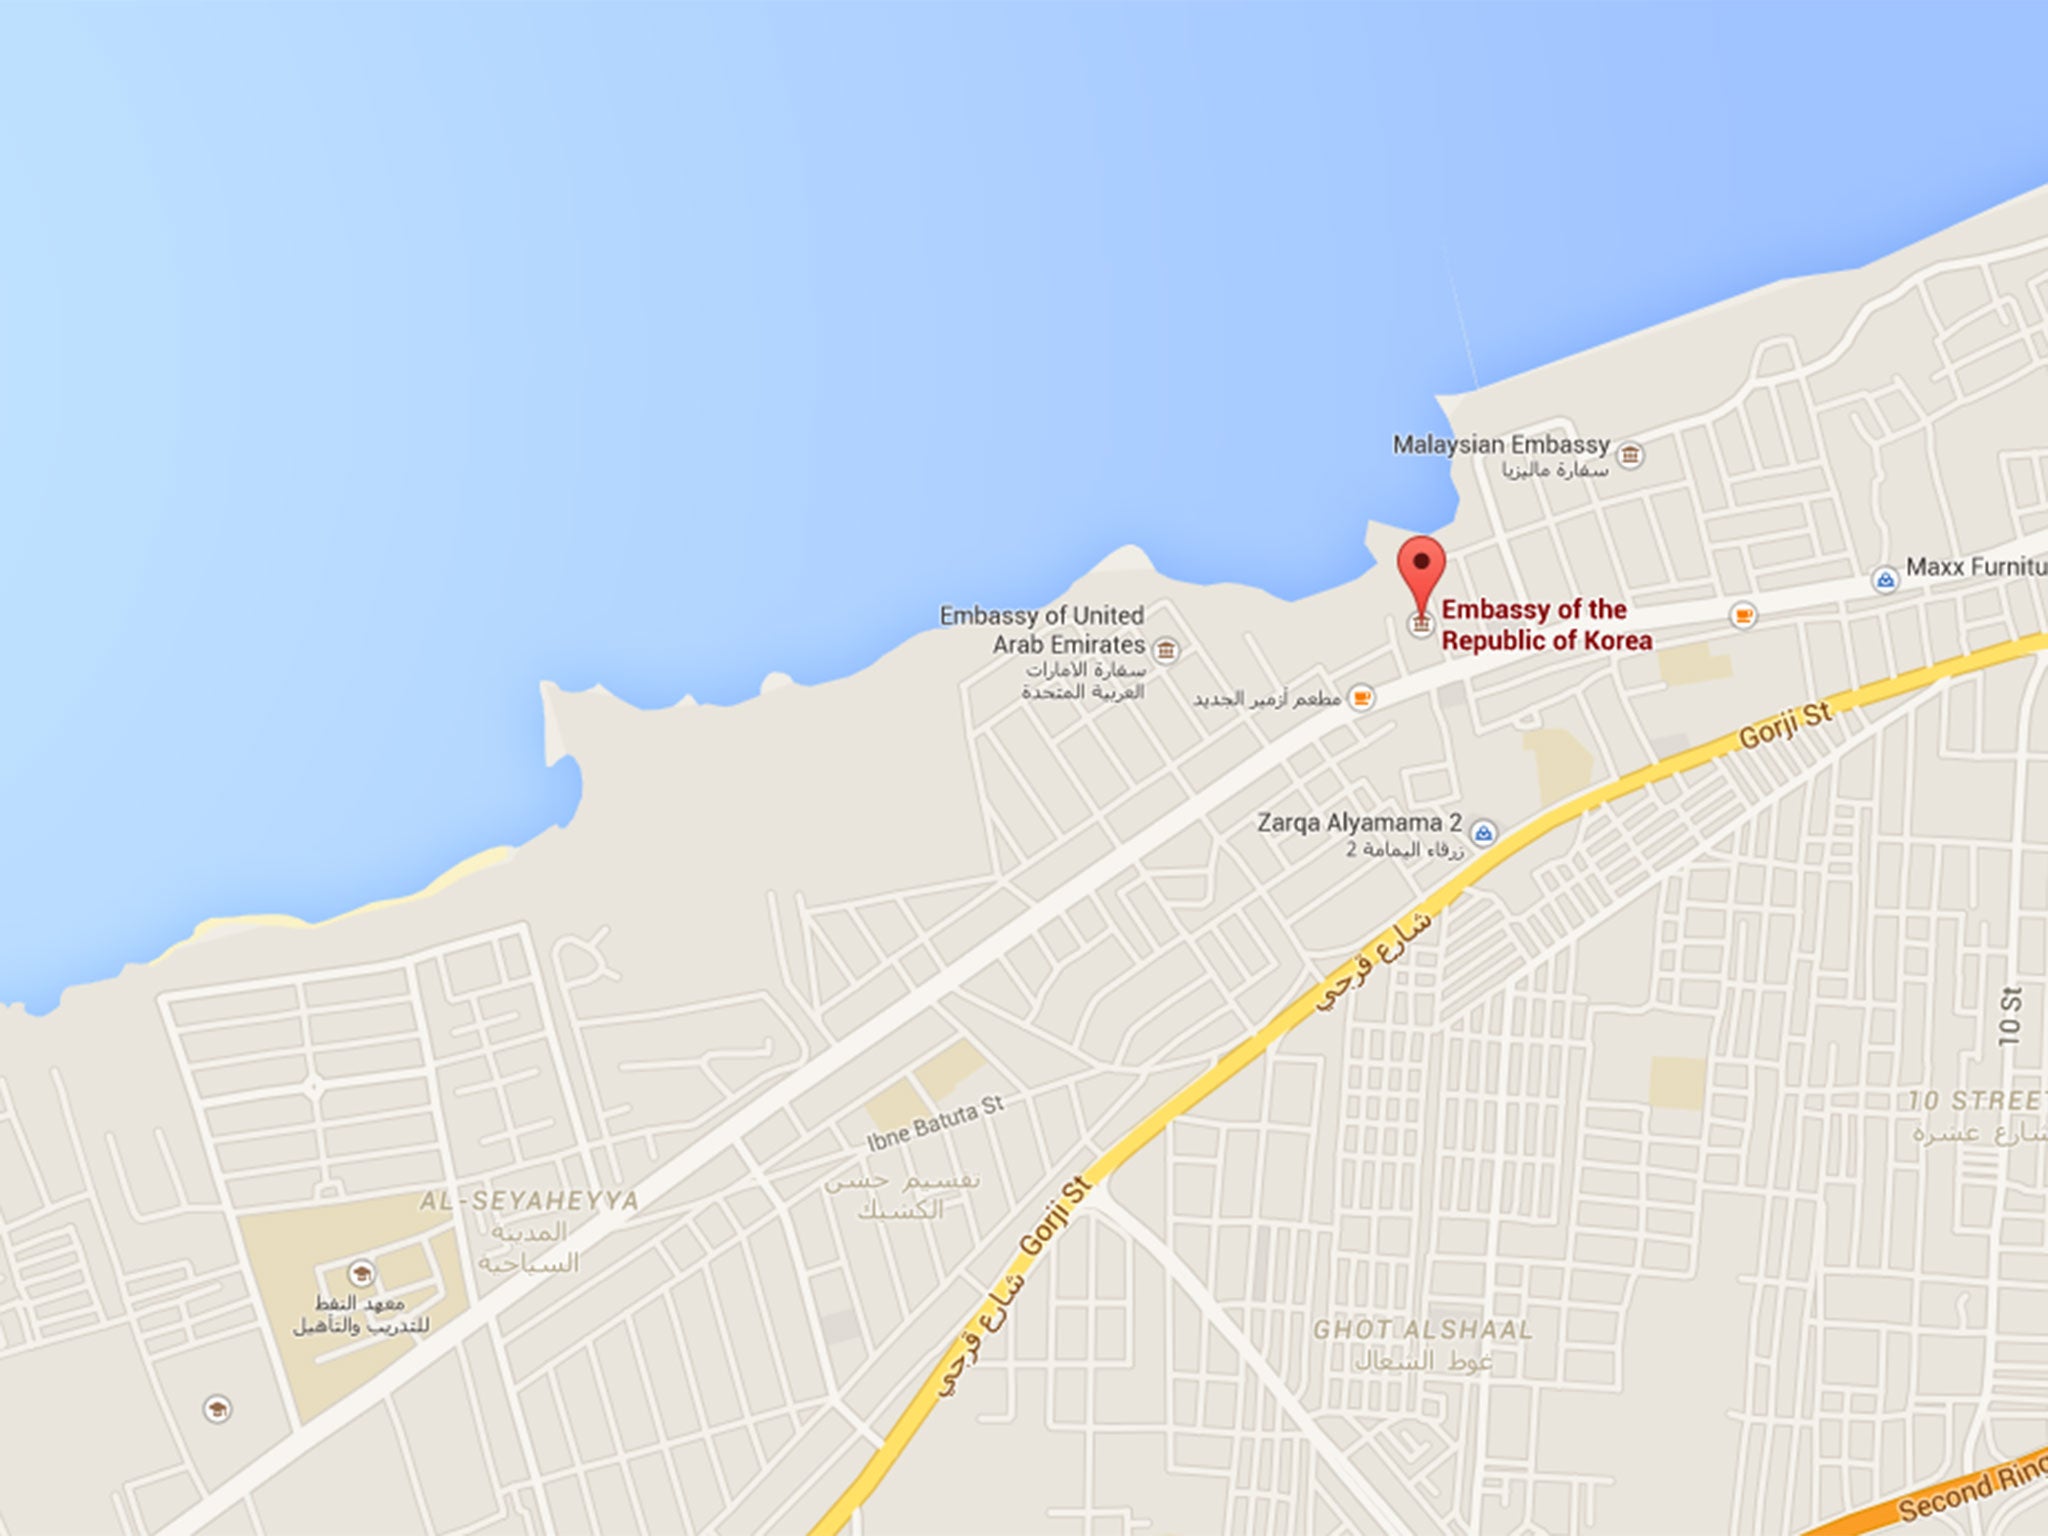 The Korean embassy in Tripoli is located on the coast near the Malaysian and UAE embassies